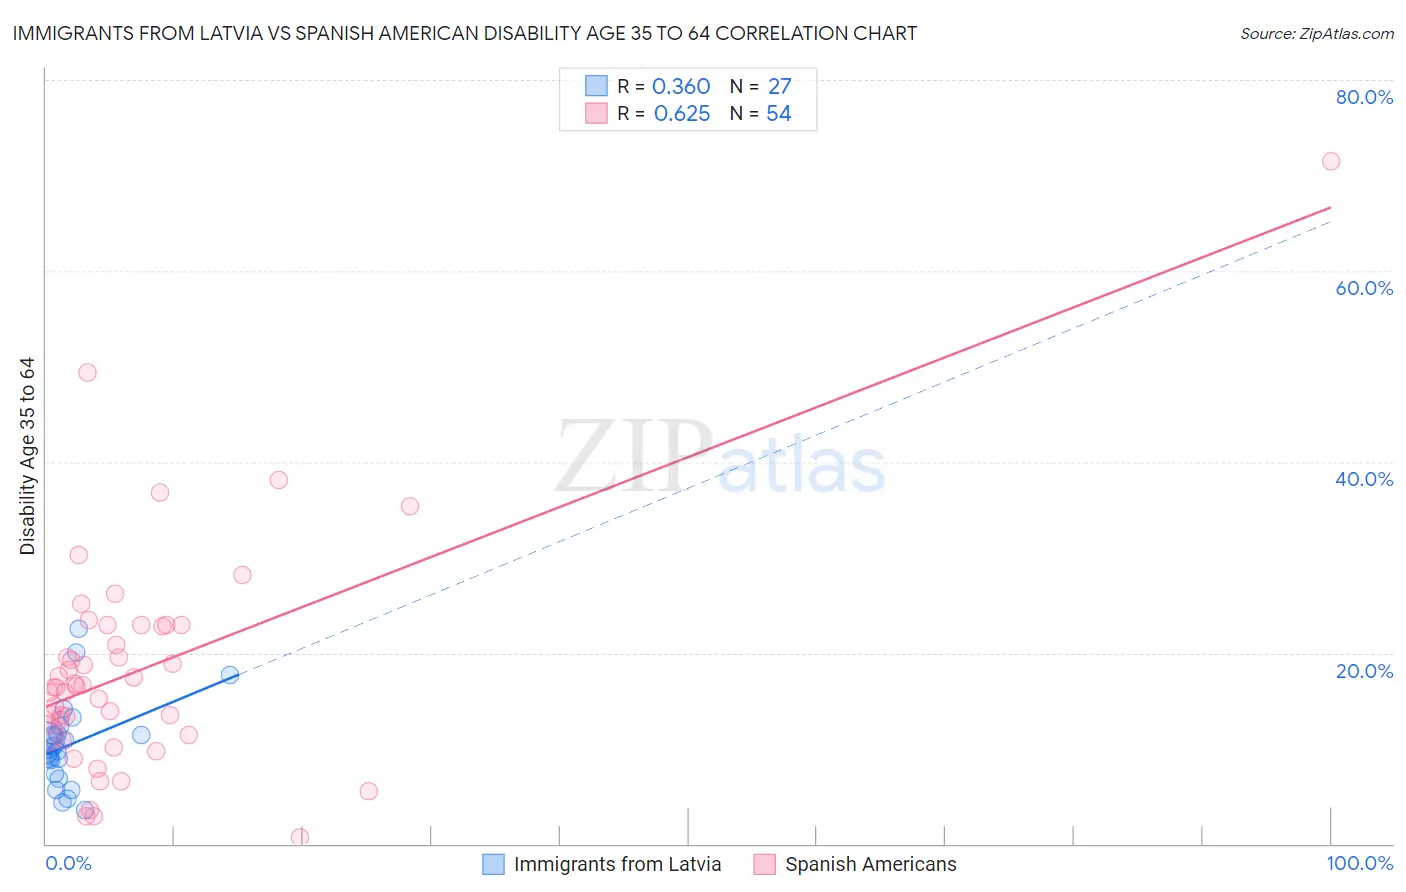 Immigrants from Latvia vs Spanish American Disability Age 35 to 64